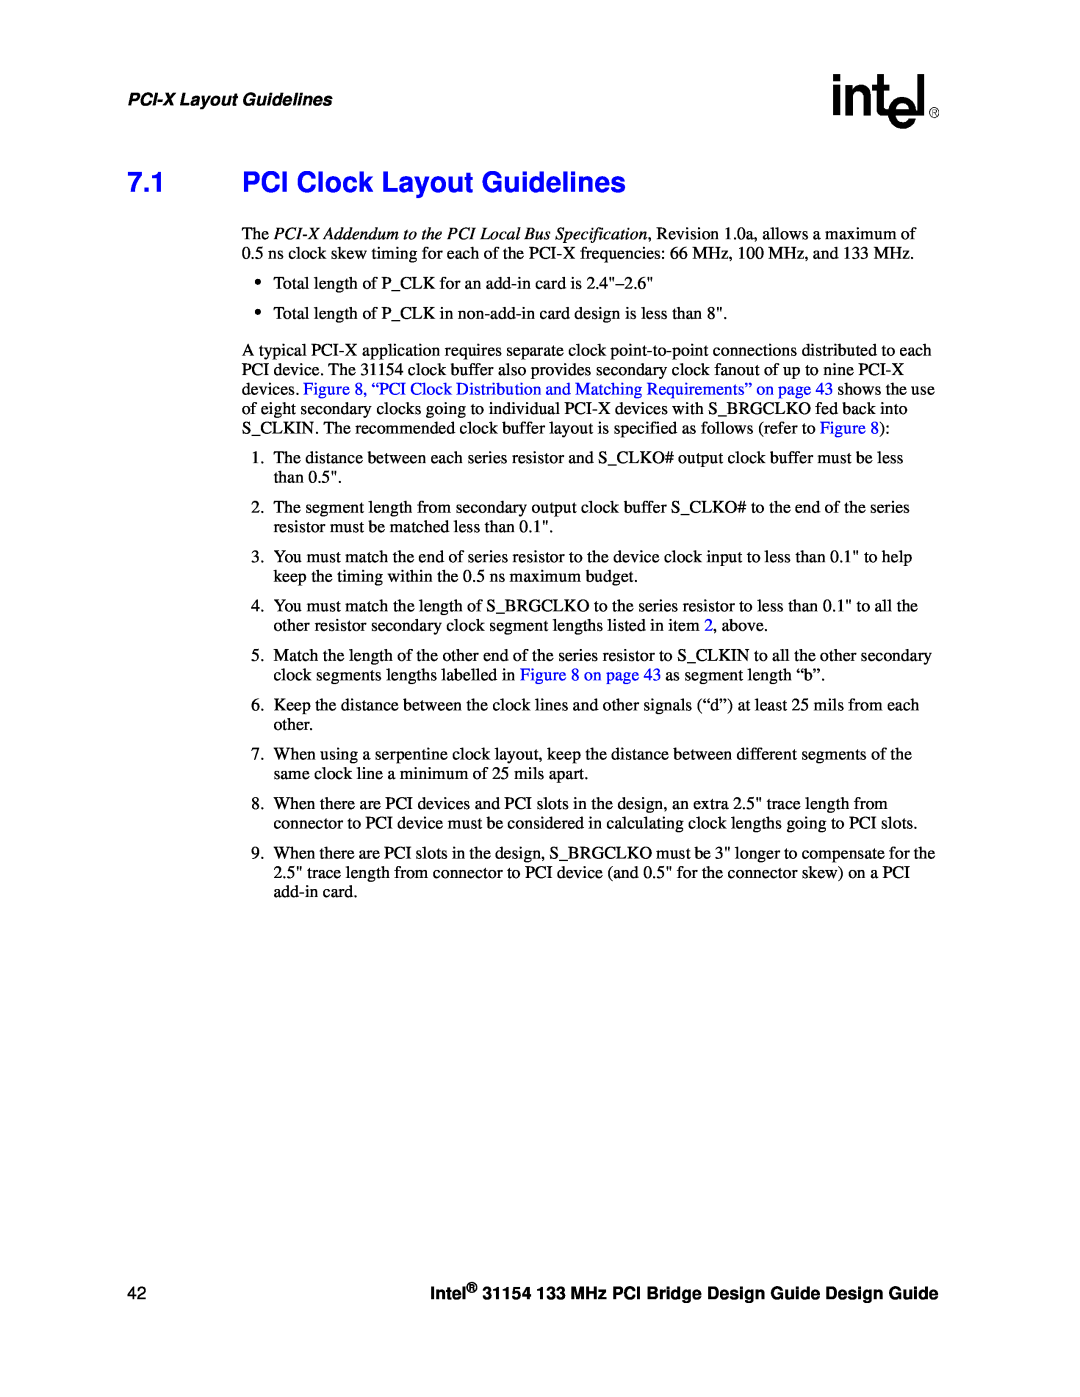 Intel PCI Clock Layout Guidelines, PCI-X Layout Guidelines, Intel 31154 133 MHz PCI Bridge Design Guide Design Guide 